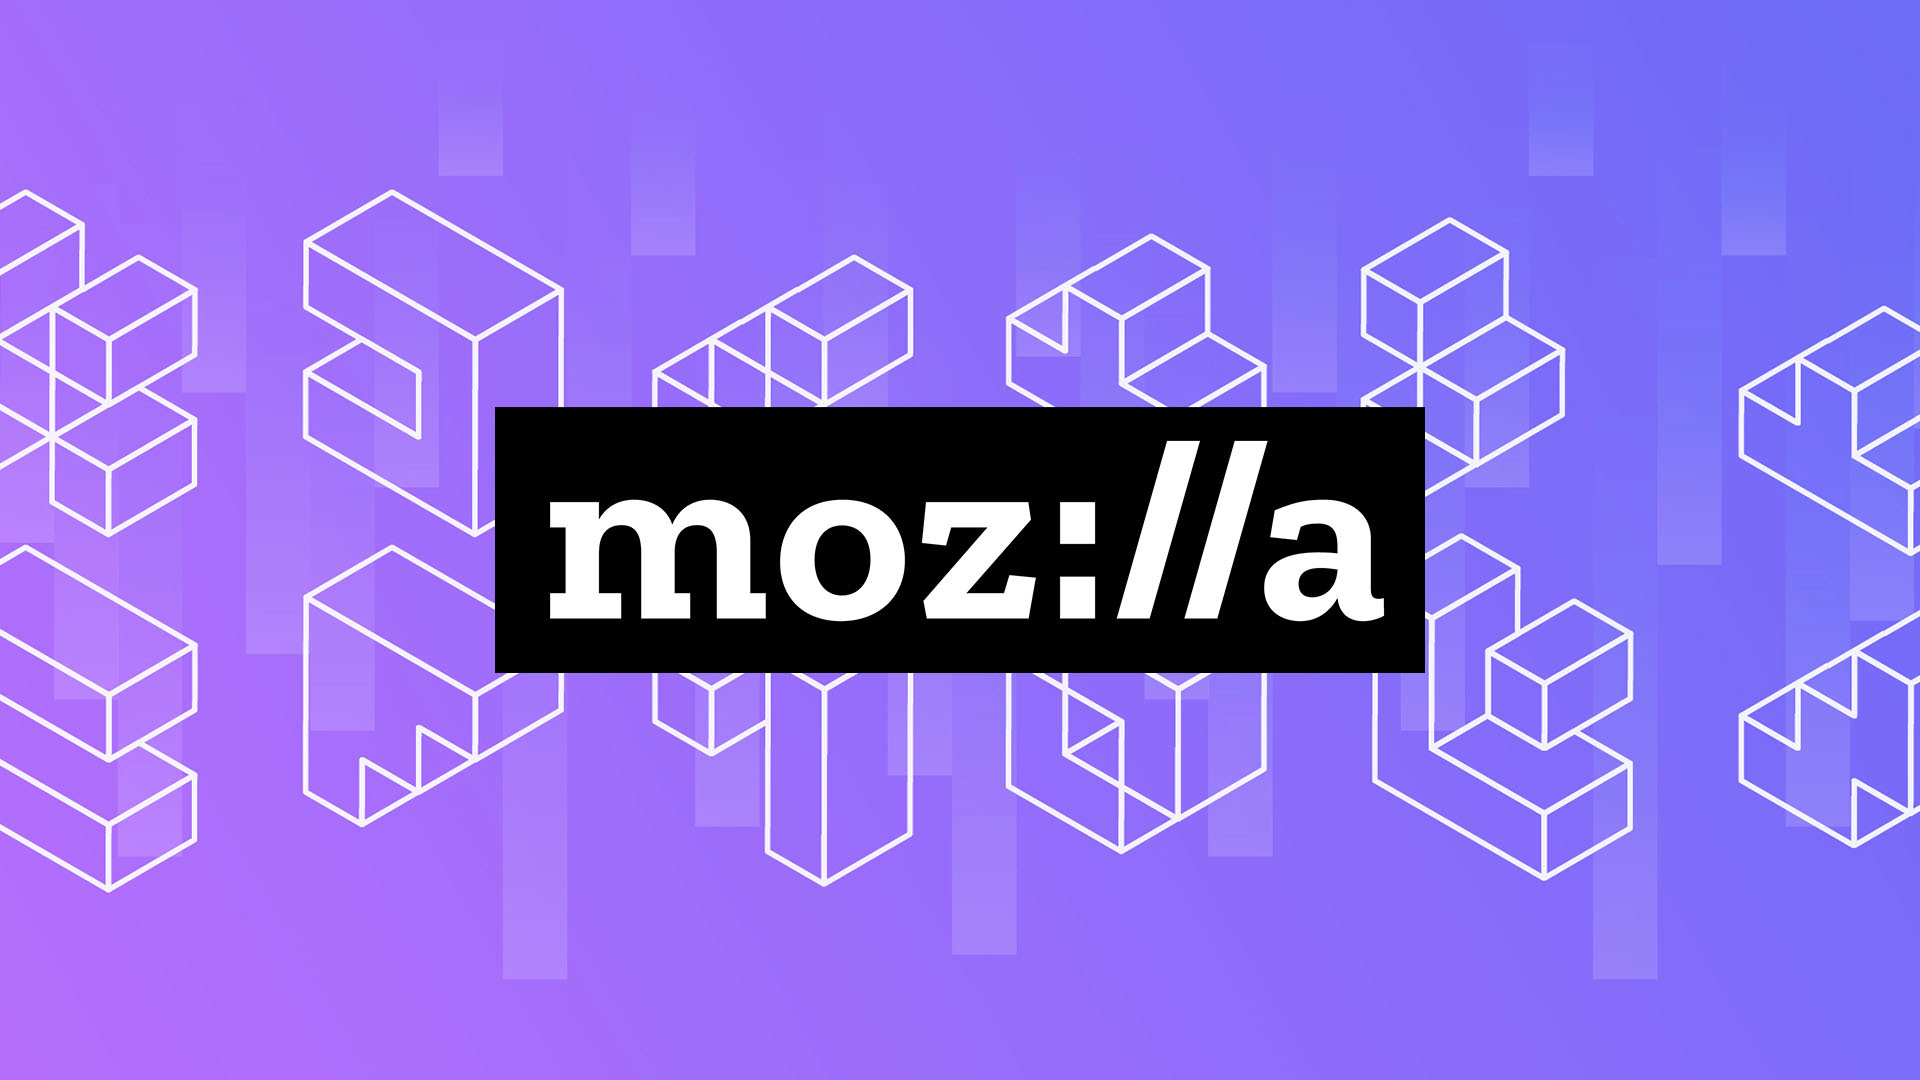 Mozilla releases local machine translation tools as part of Project Bergamot